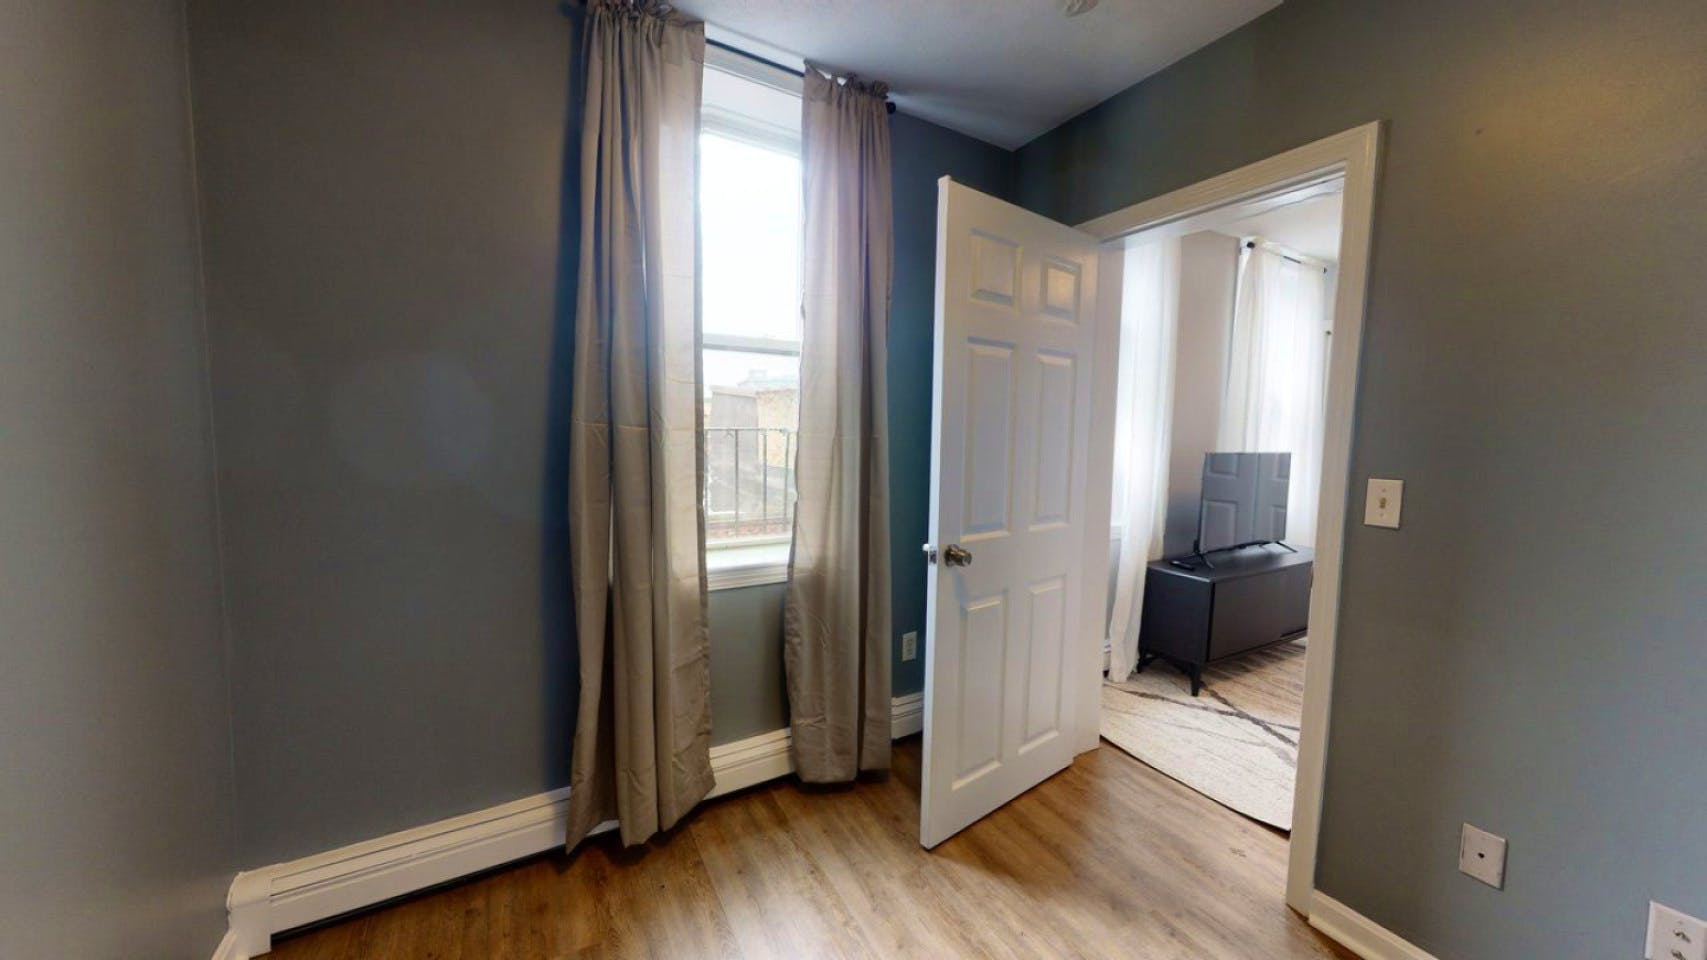 Chic Bright Apt. 1 mile away from Old North Church